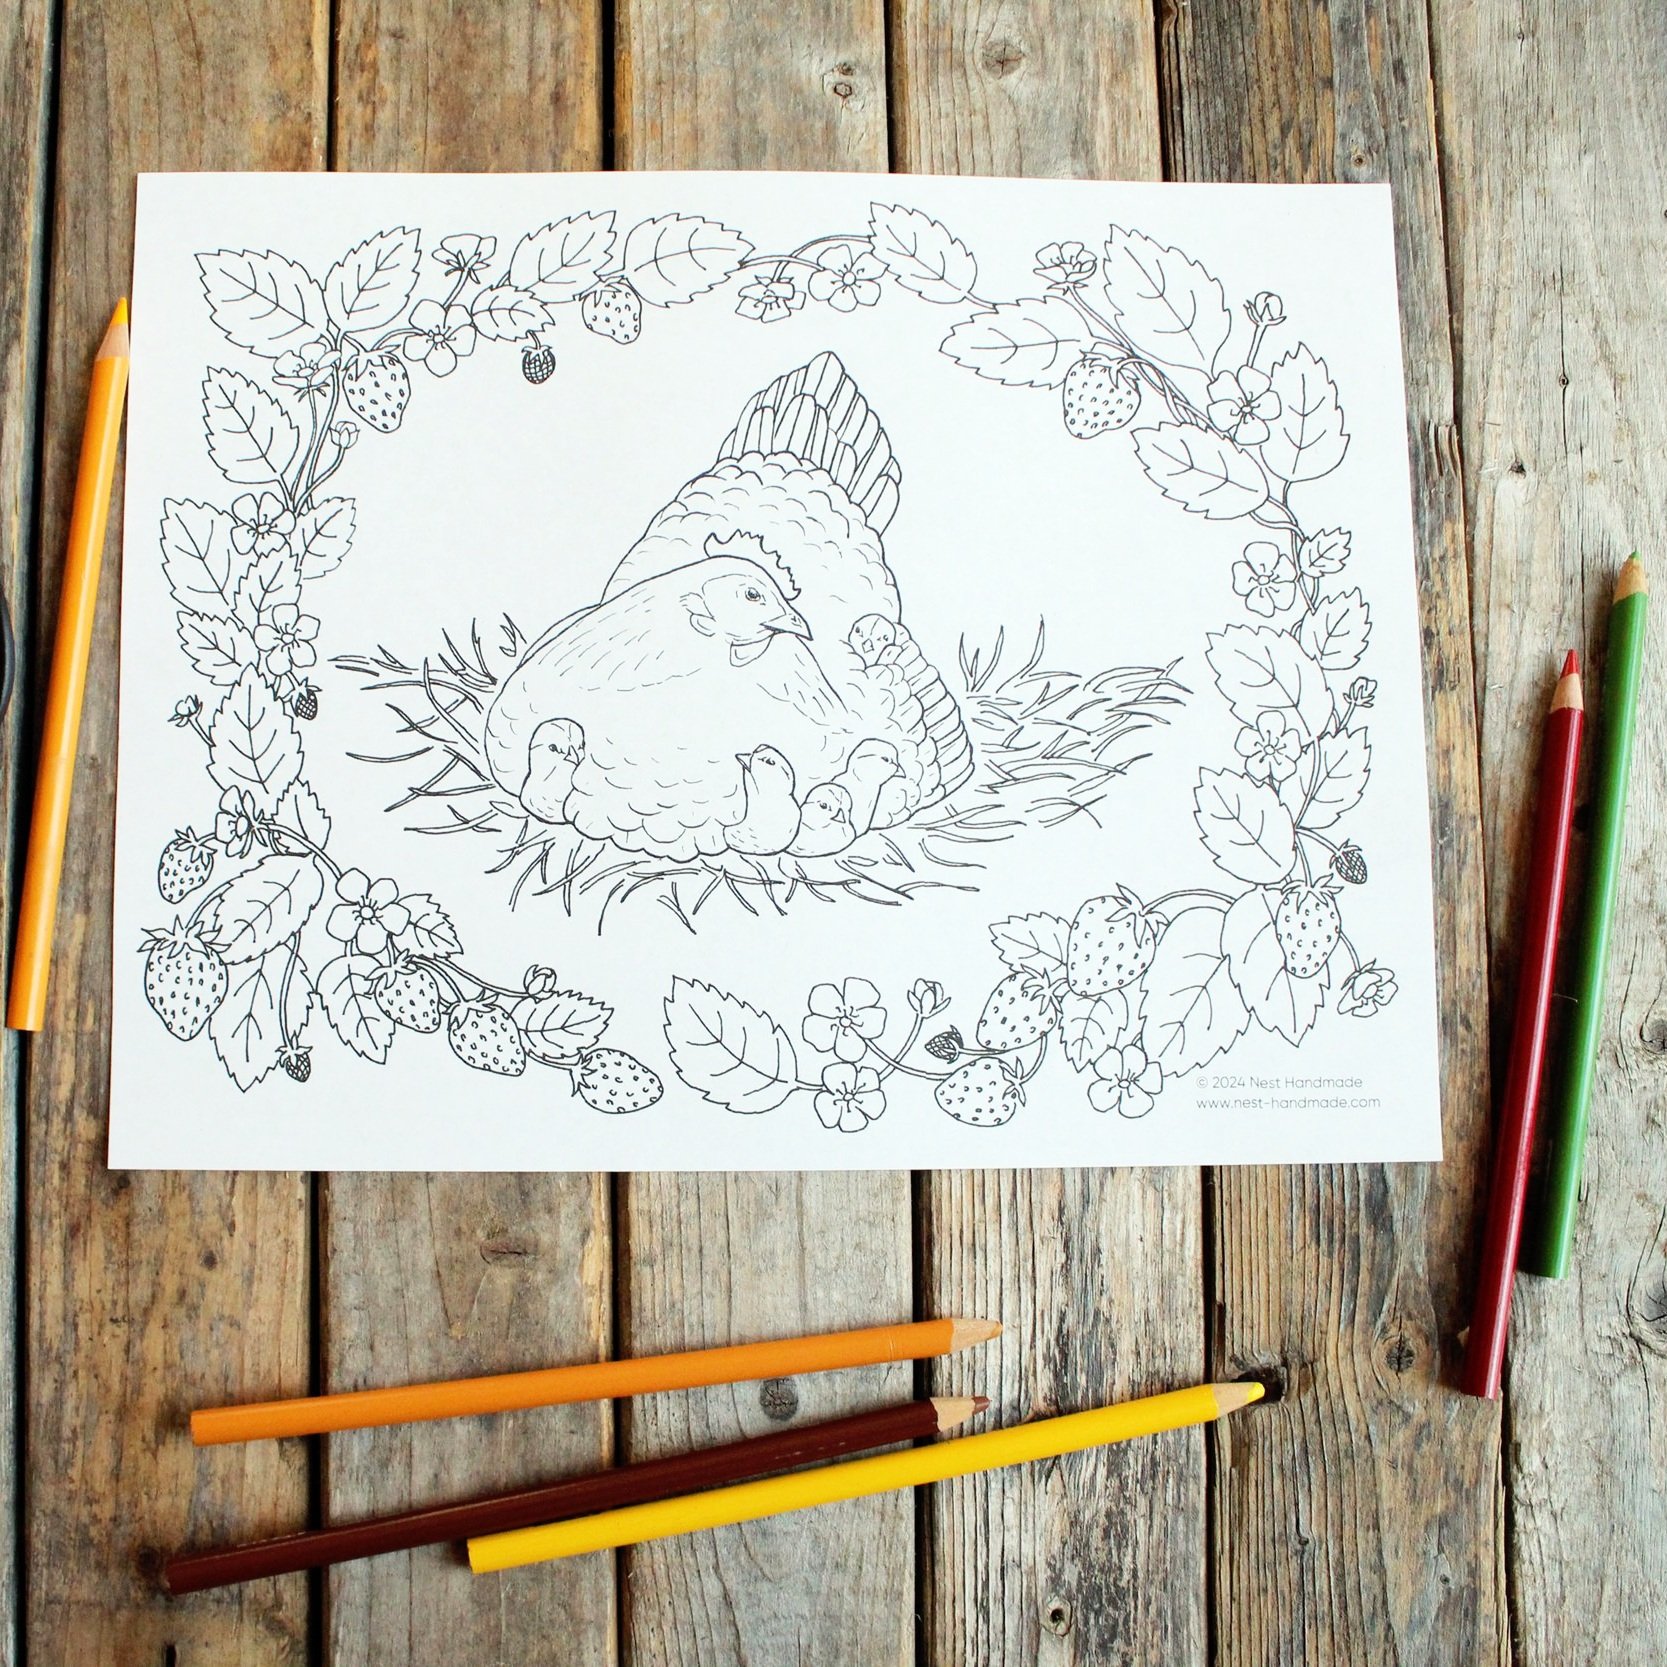 Downloadable Coloring Pages